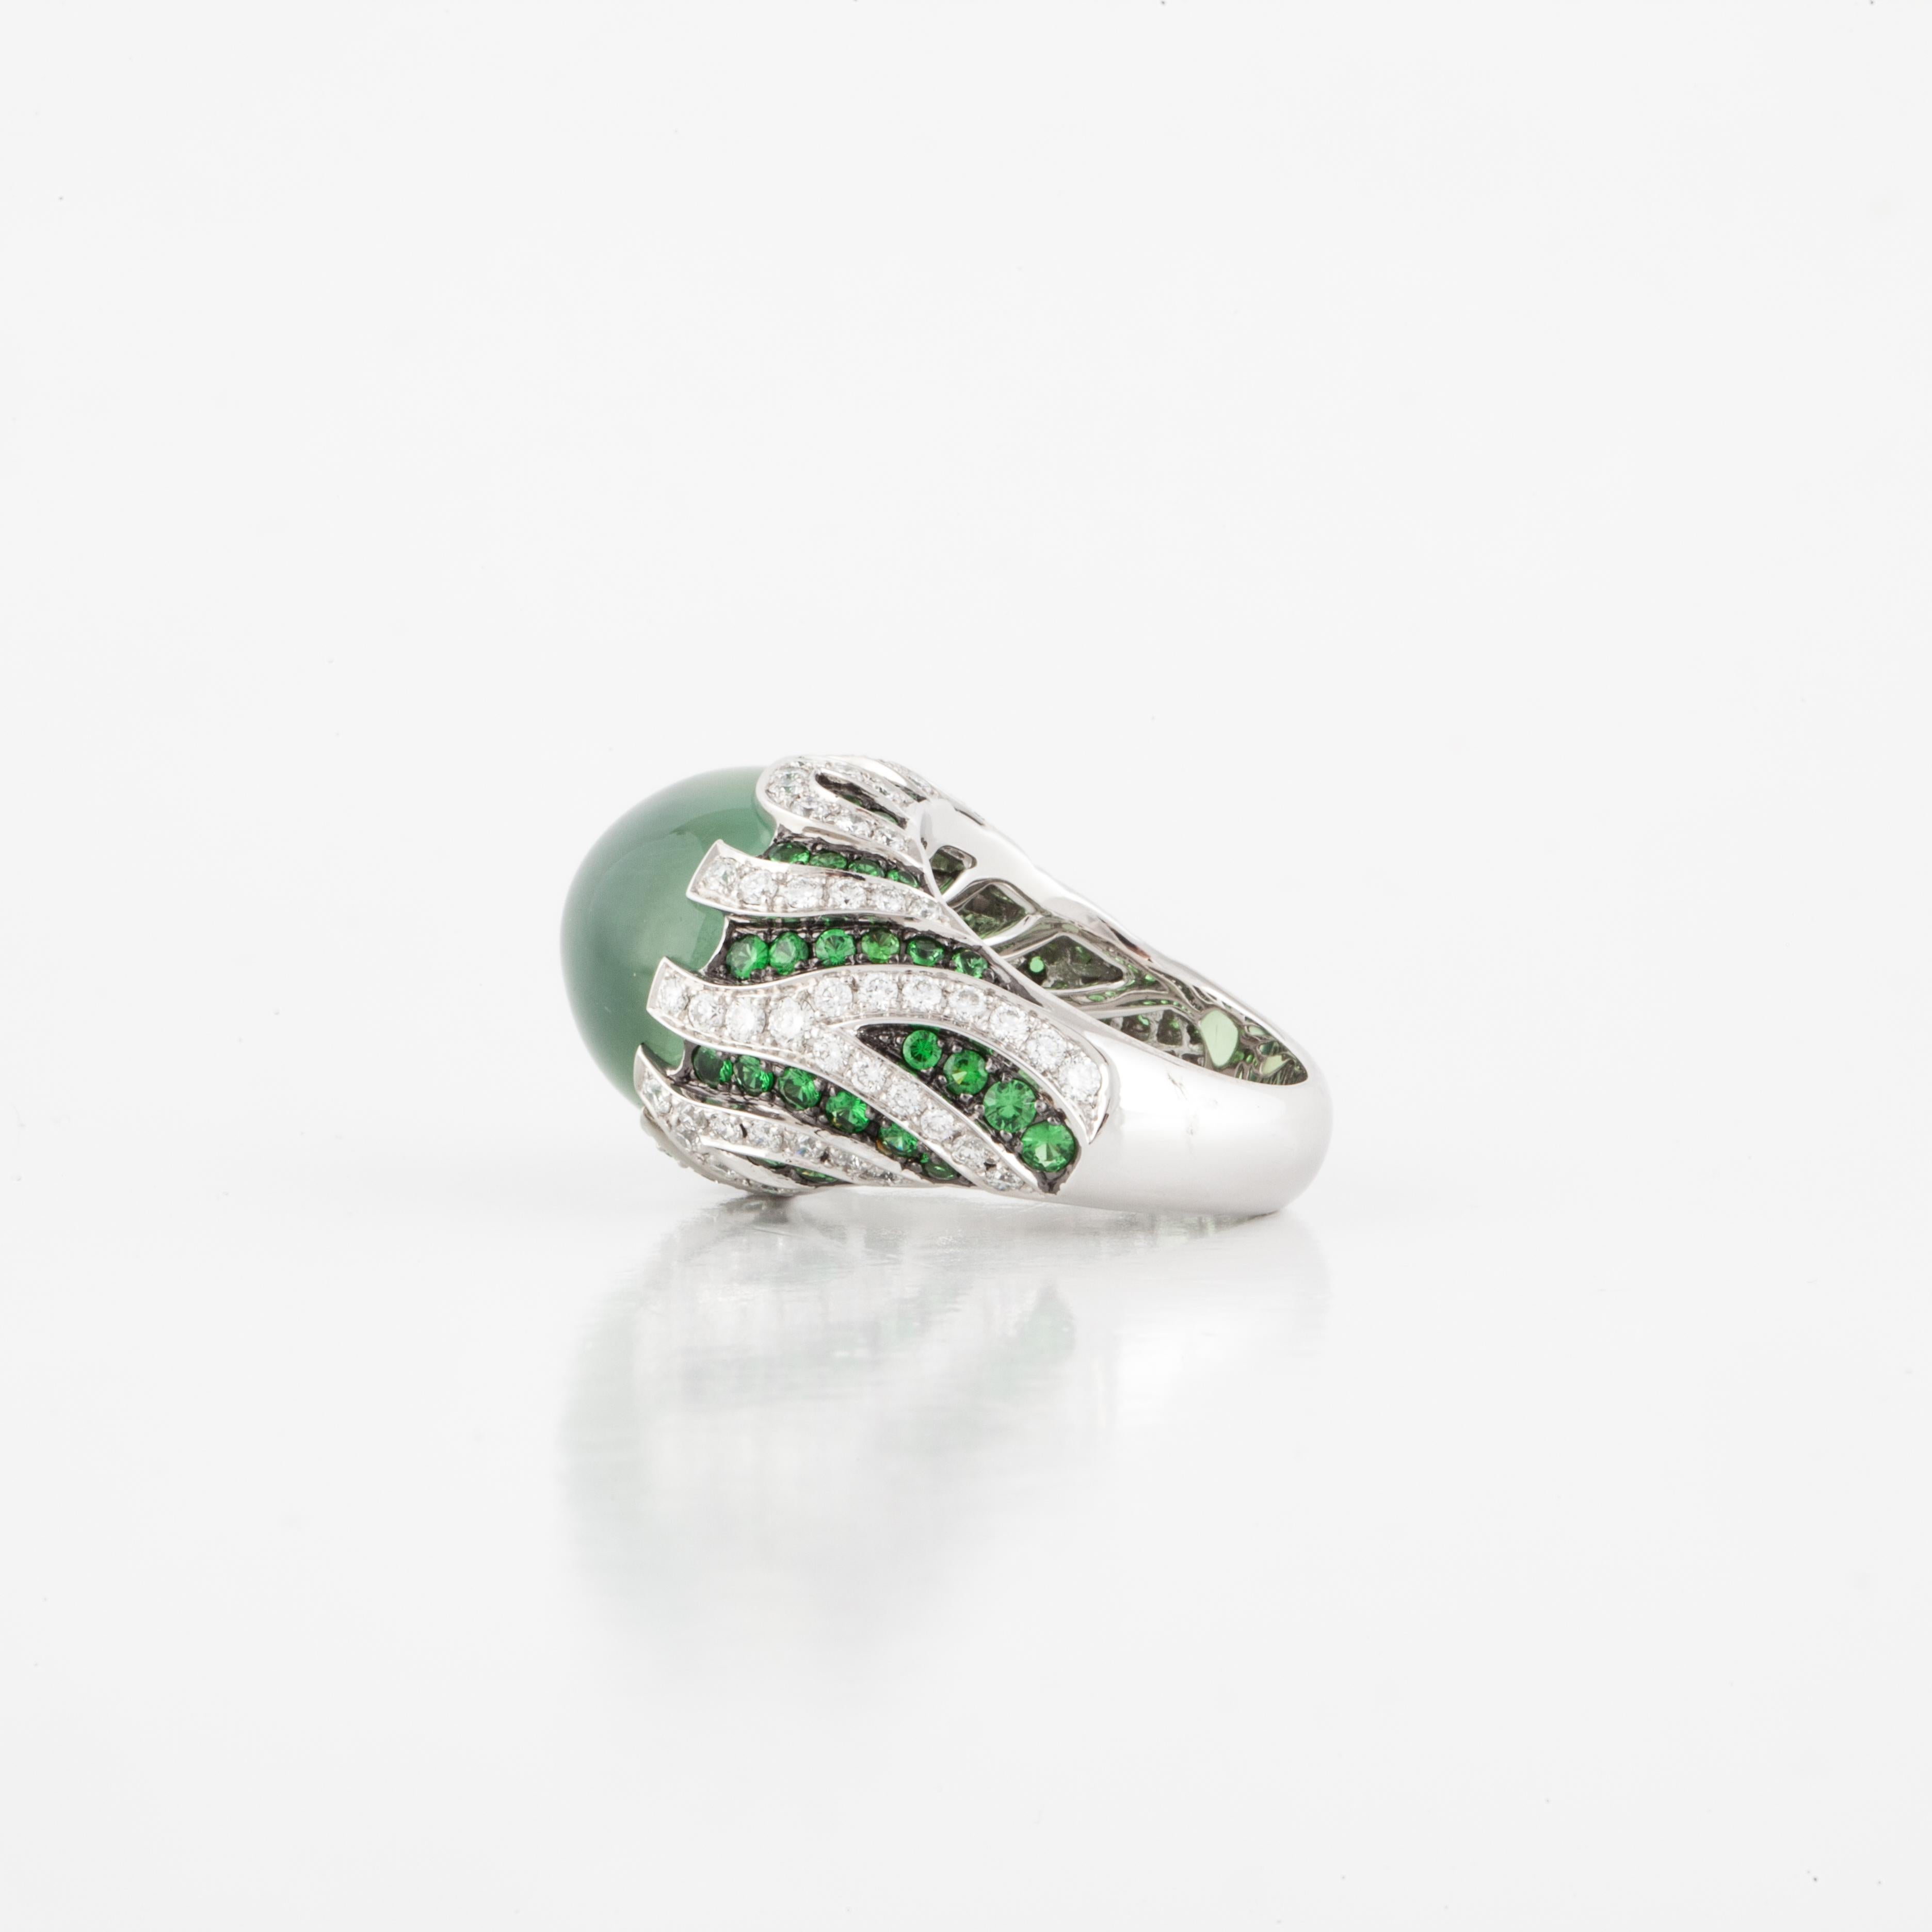 18K white gold domed ring featuring a cabochon prehnite accented by round tsavorite garnets and diamonds.  There are 125 round diamonds that total 3.10 carats; H-I color, VS clarity and 65 round tsavorite garnets.  The ring is currently a size 6 1/2